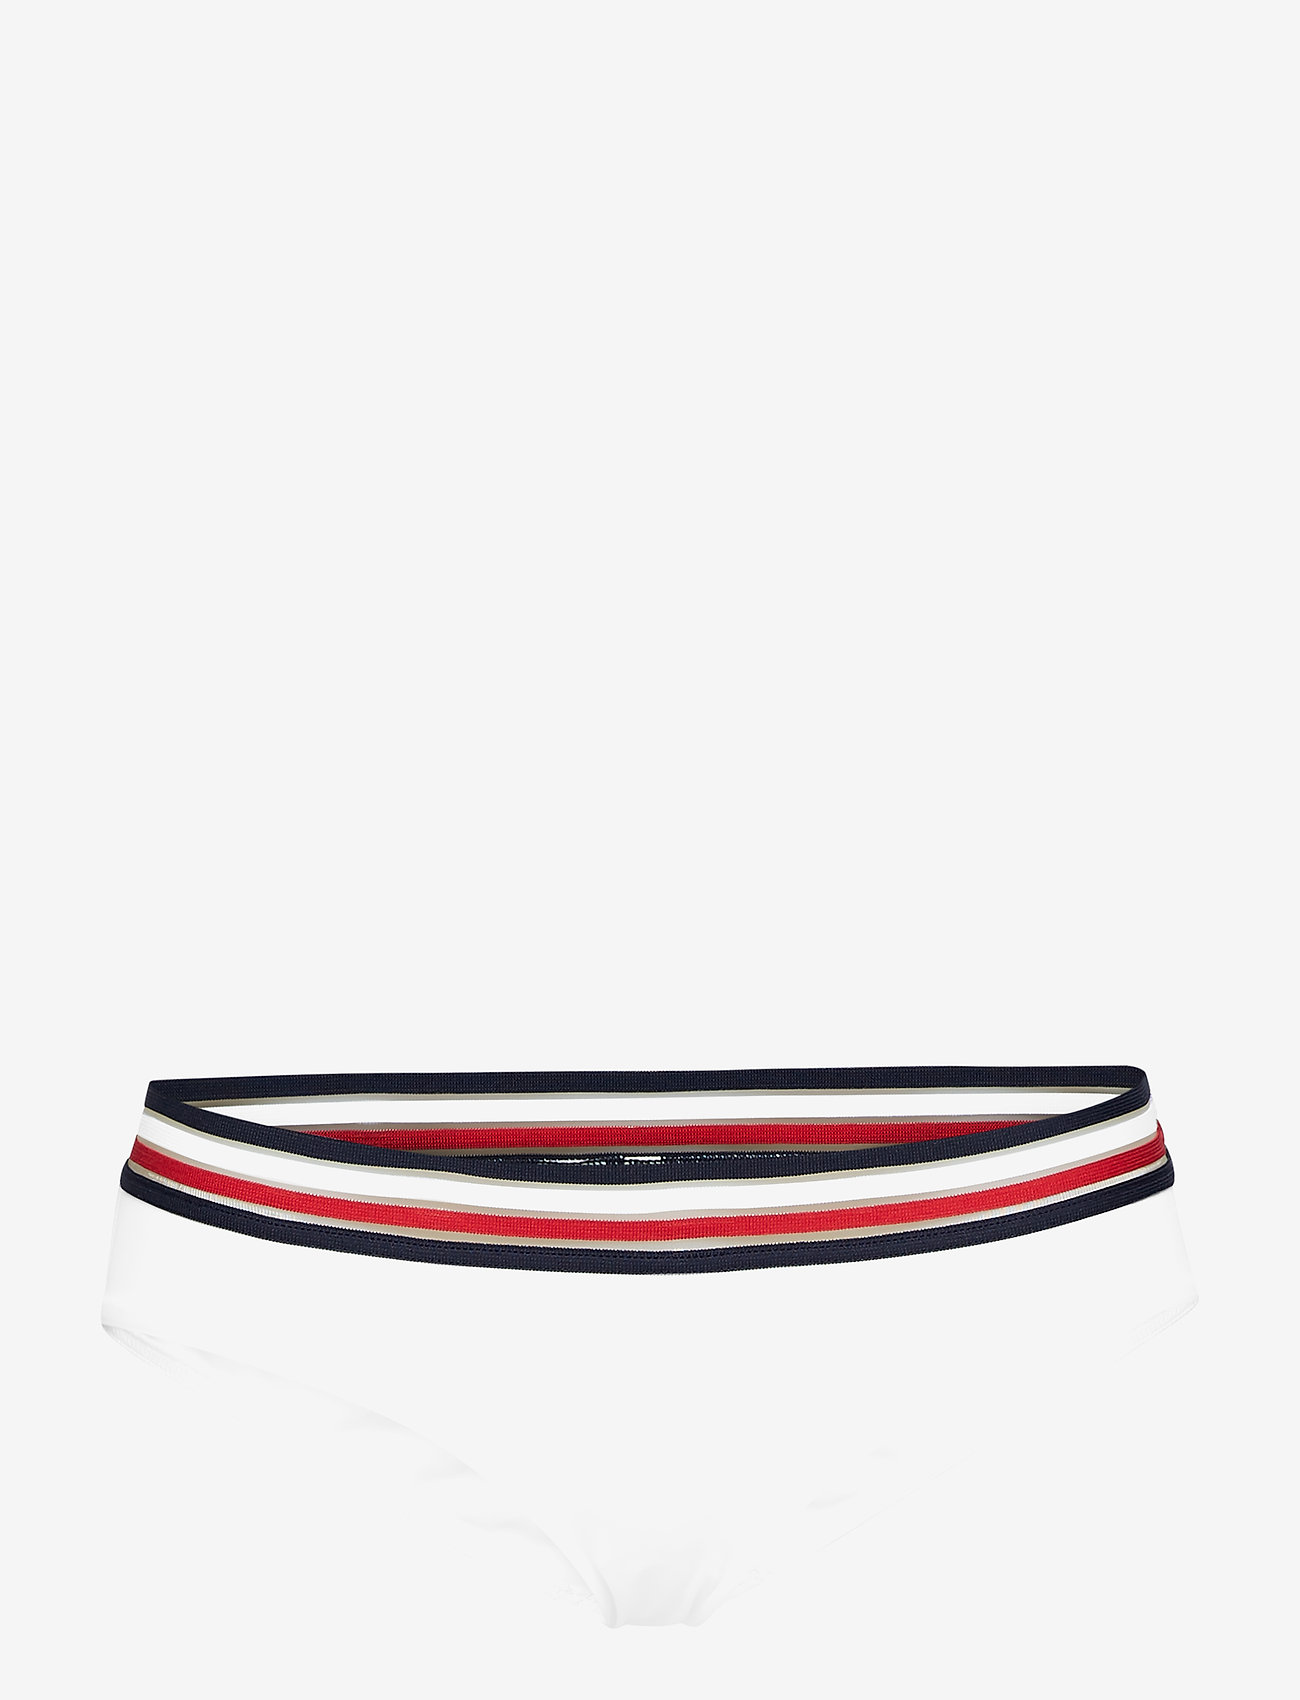 pvh workday tommy hilfiger